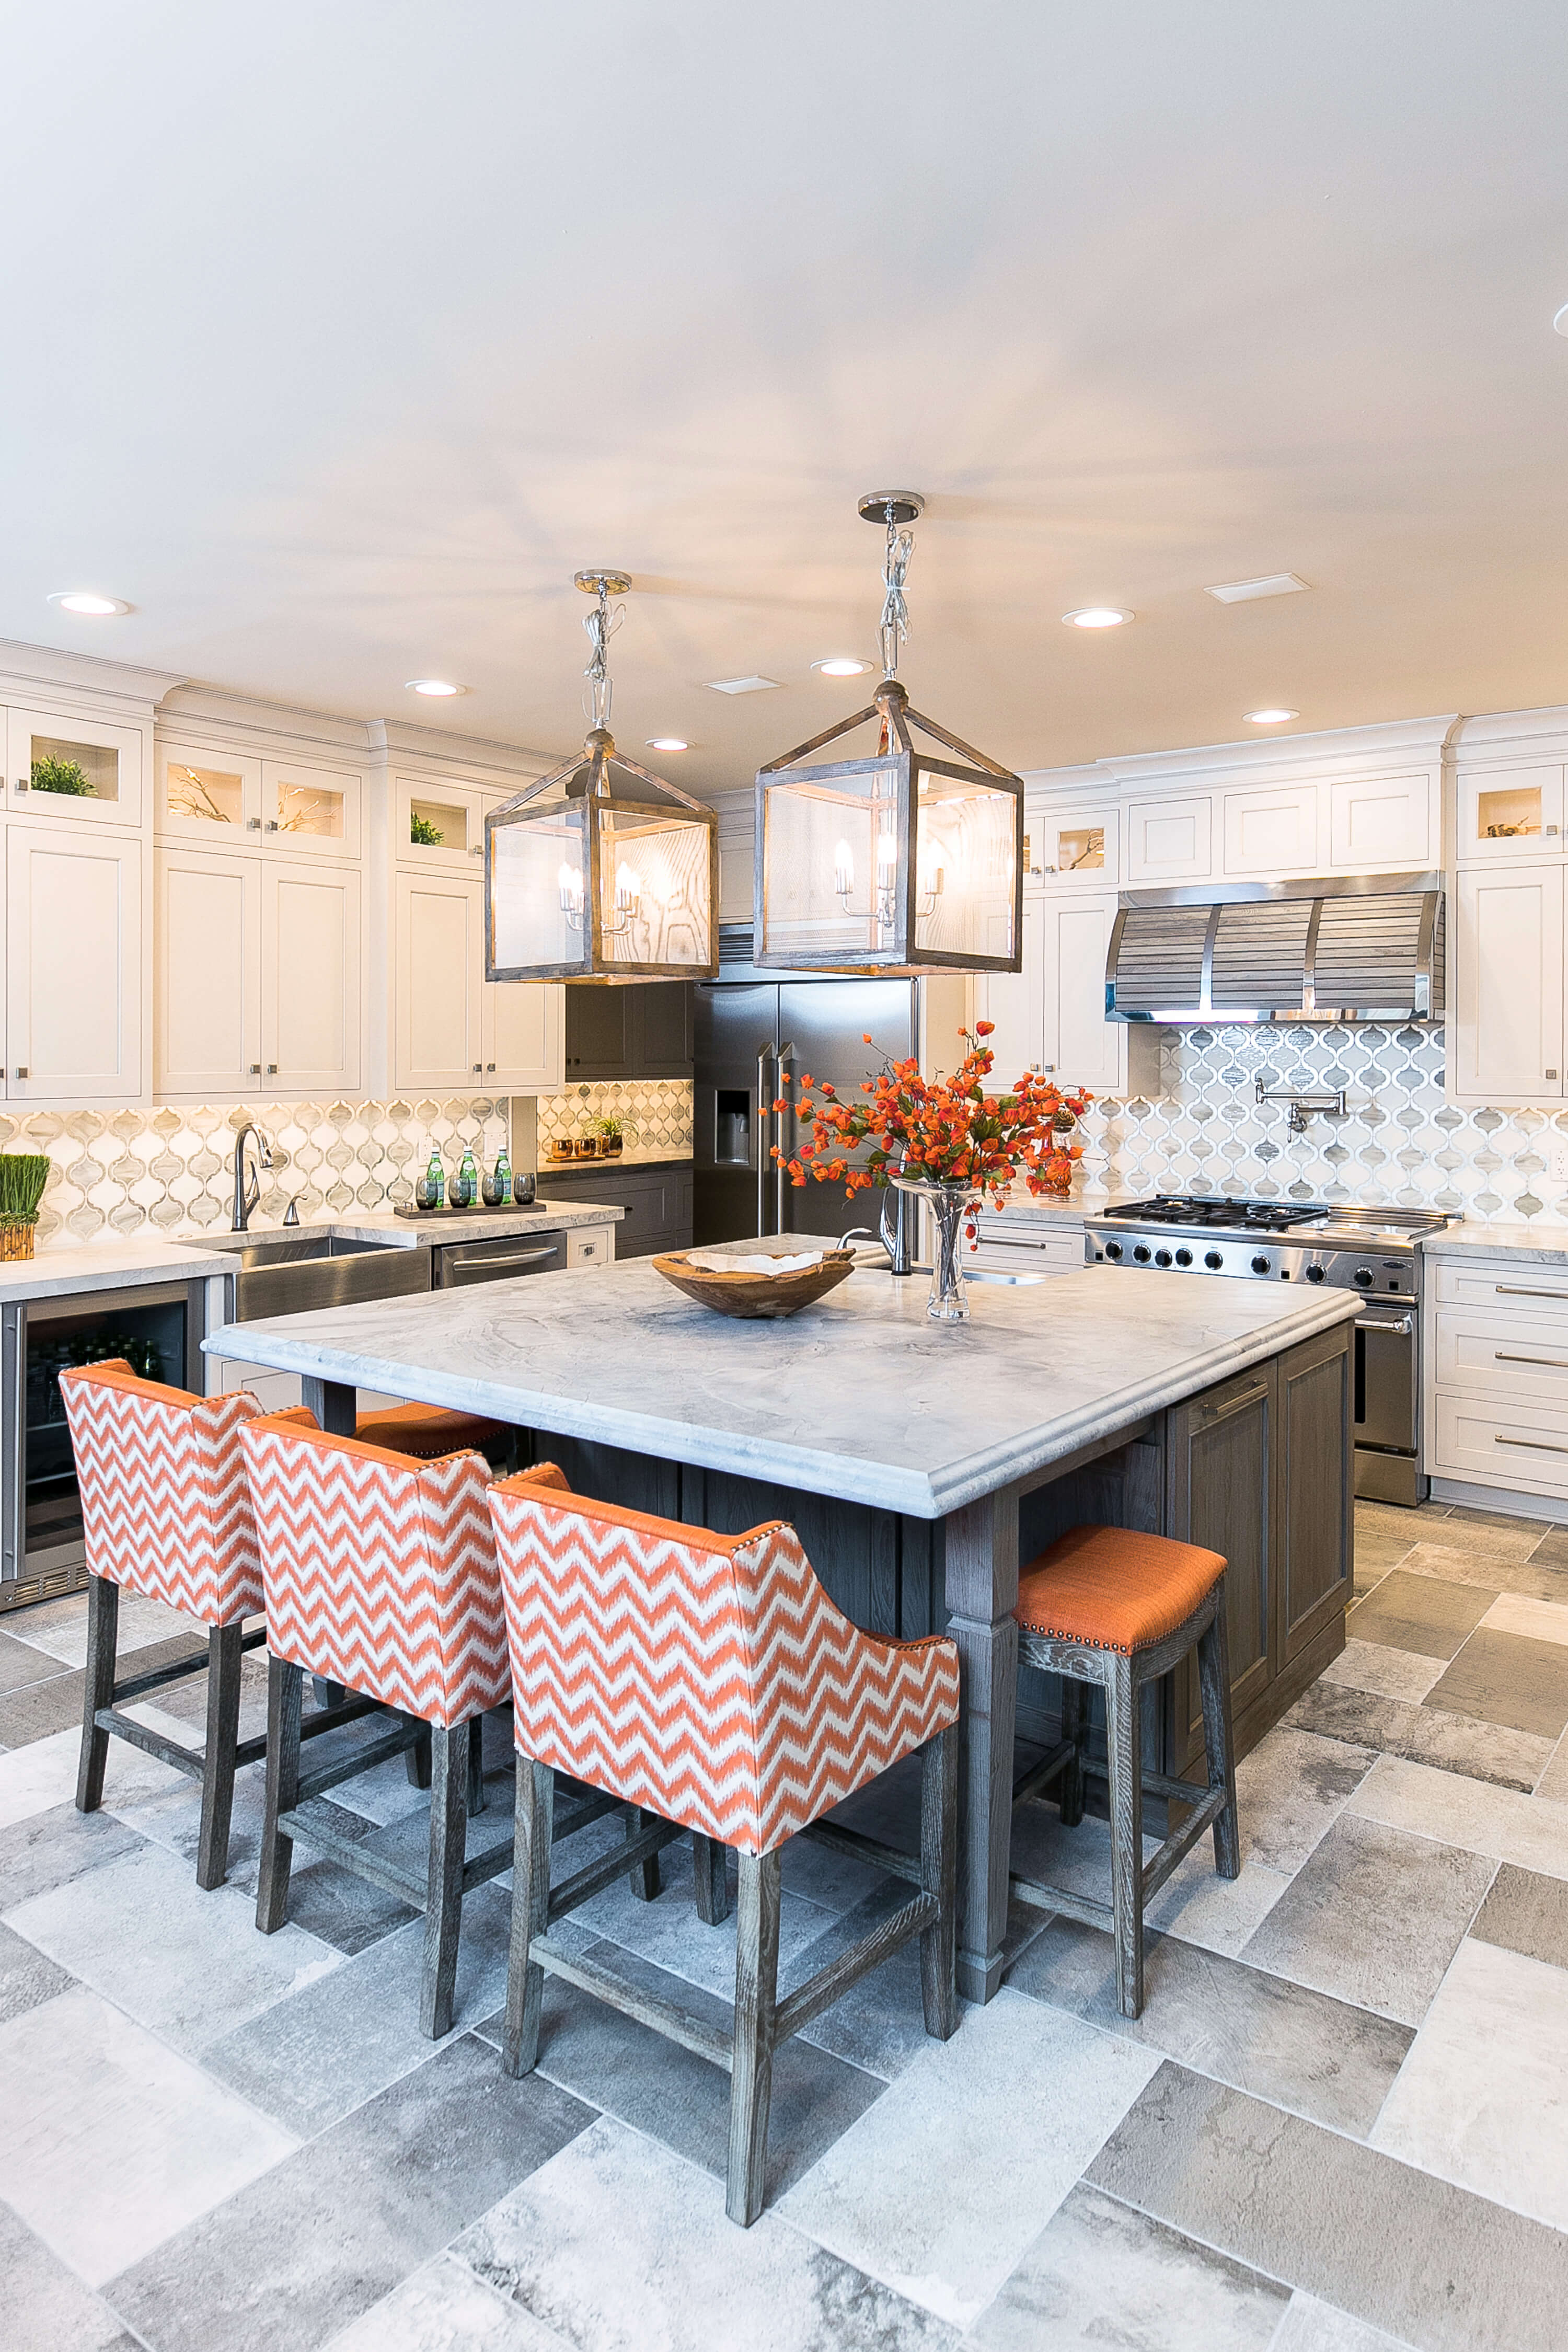 A square kitchen island with weathered wood cabinets and orange stools surrounded by white shaker cabinets for the perimeter.